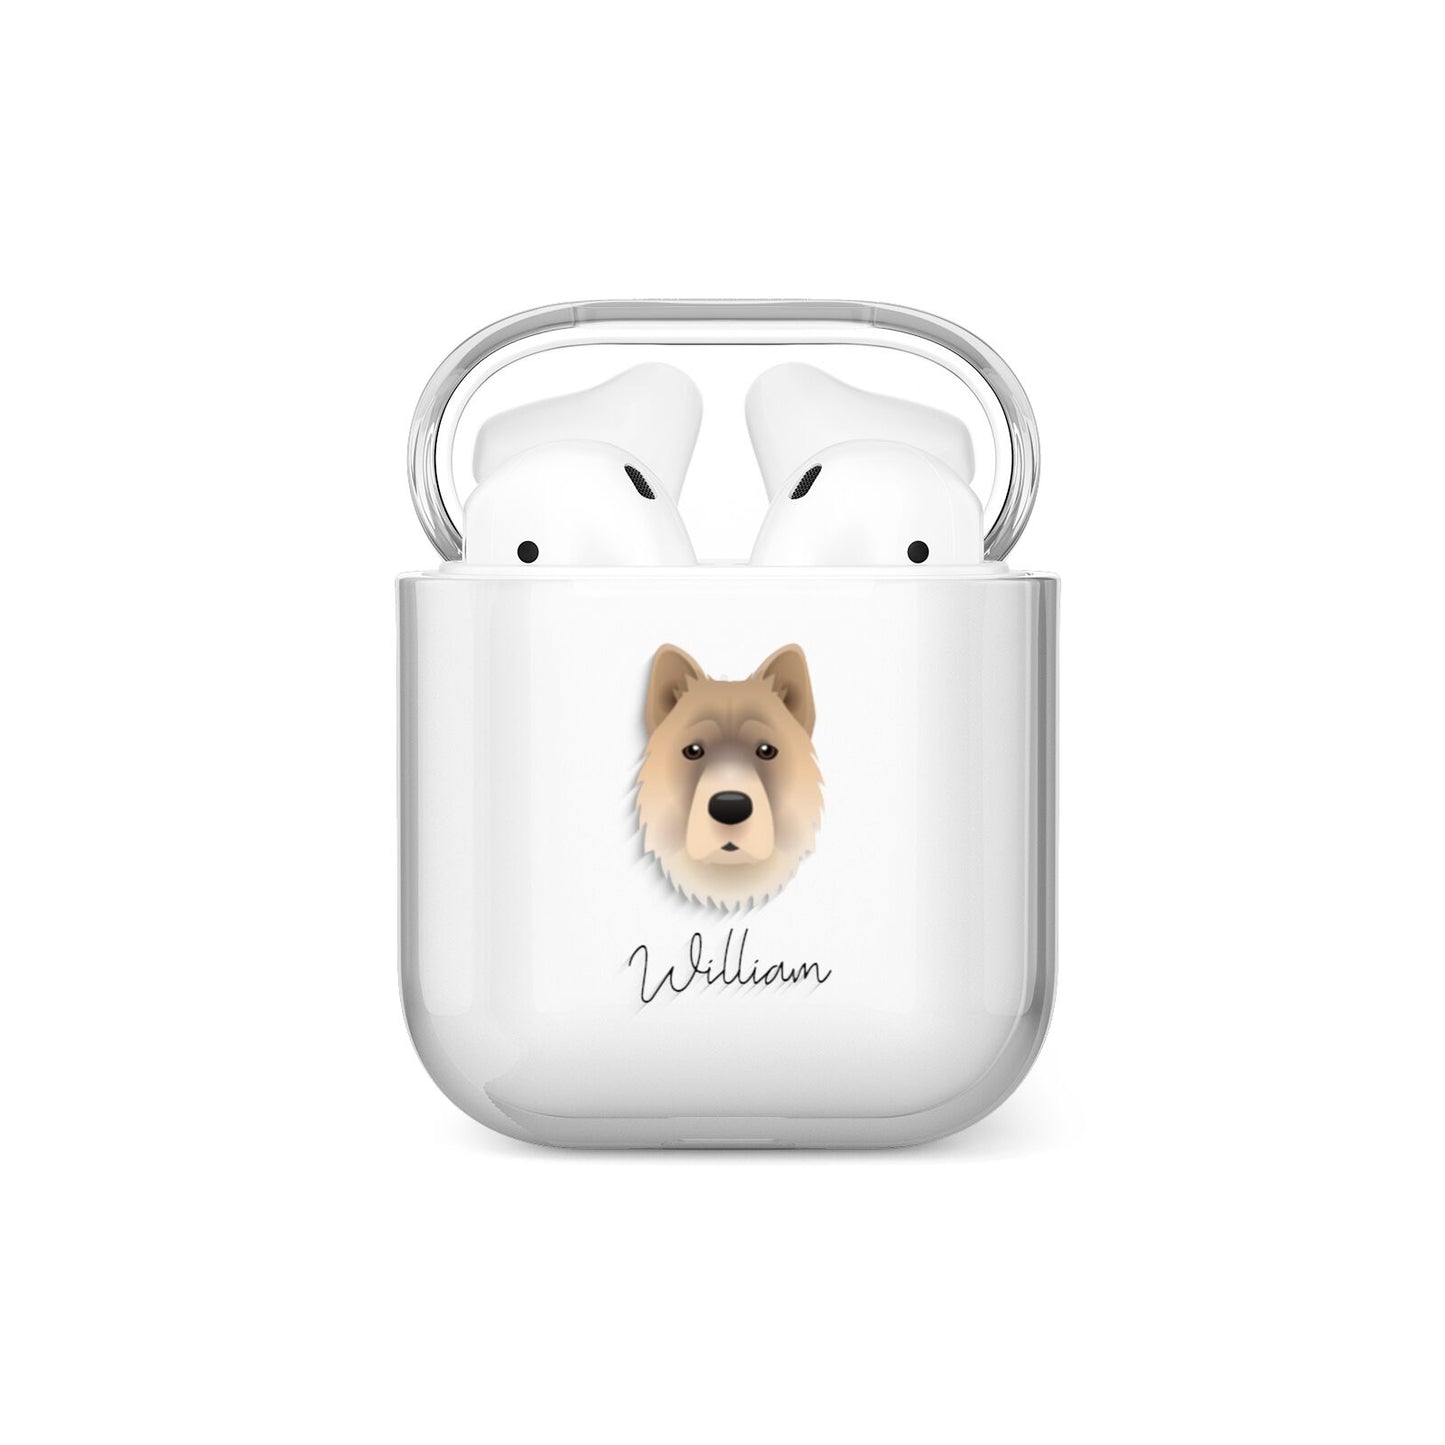 Chow Shepherd Personalised AirPods Case